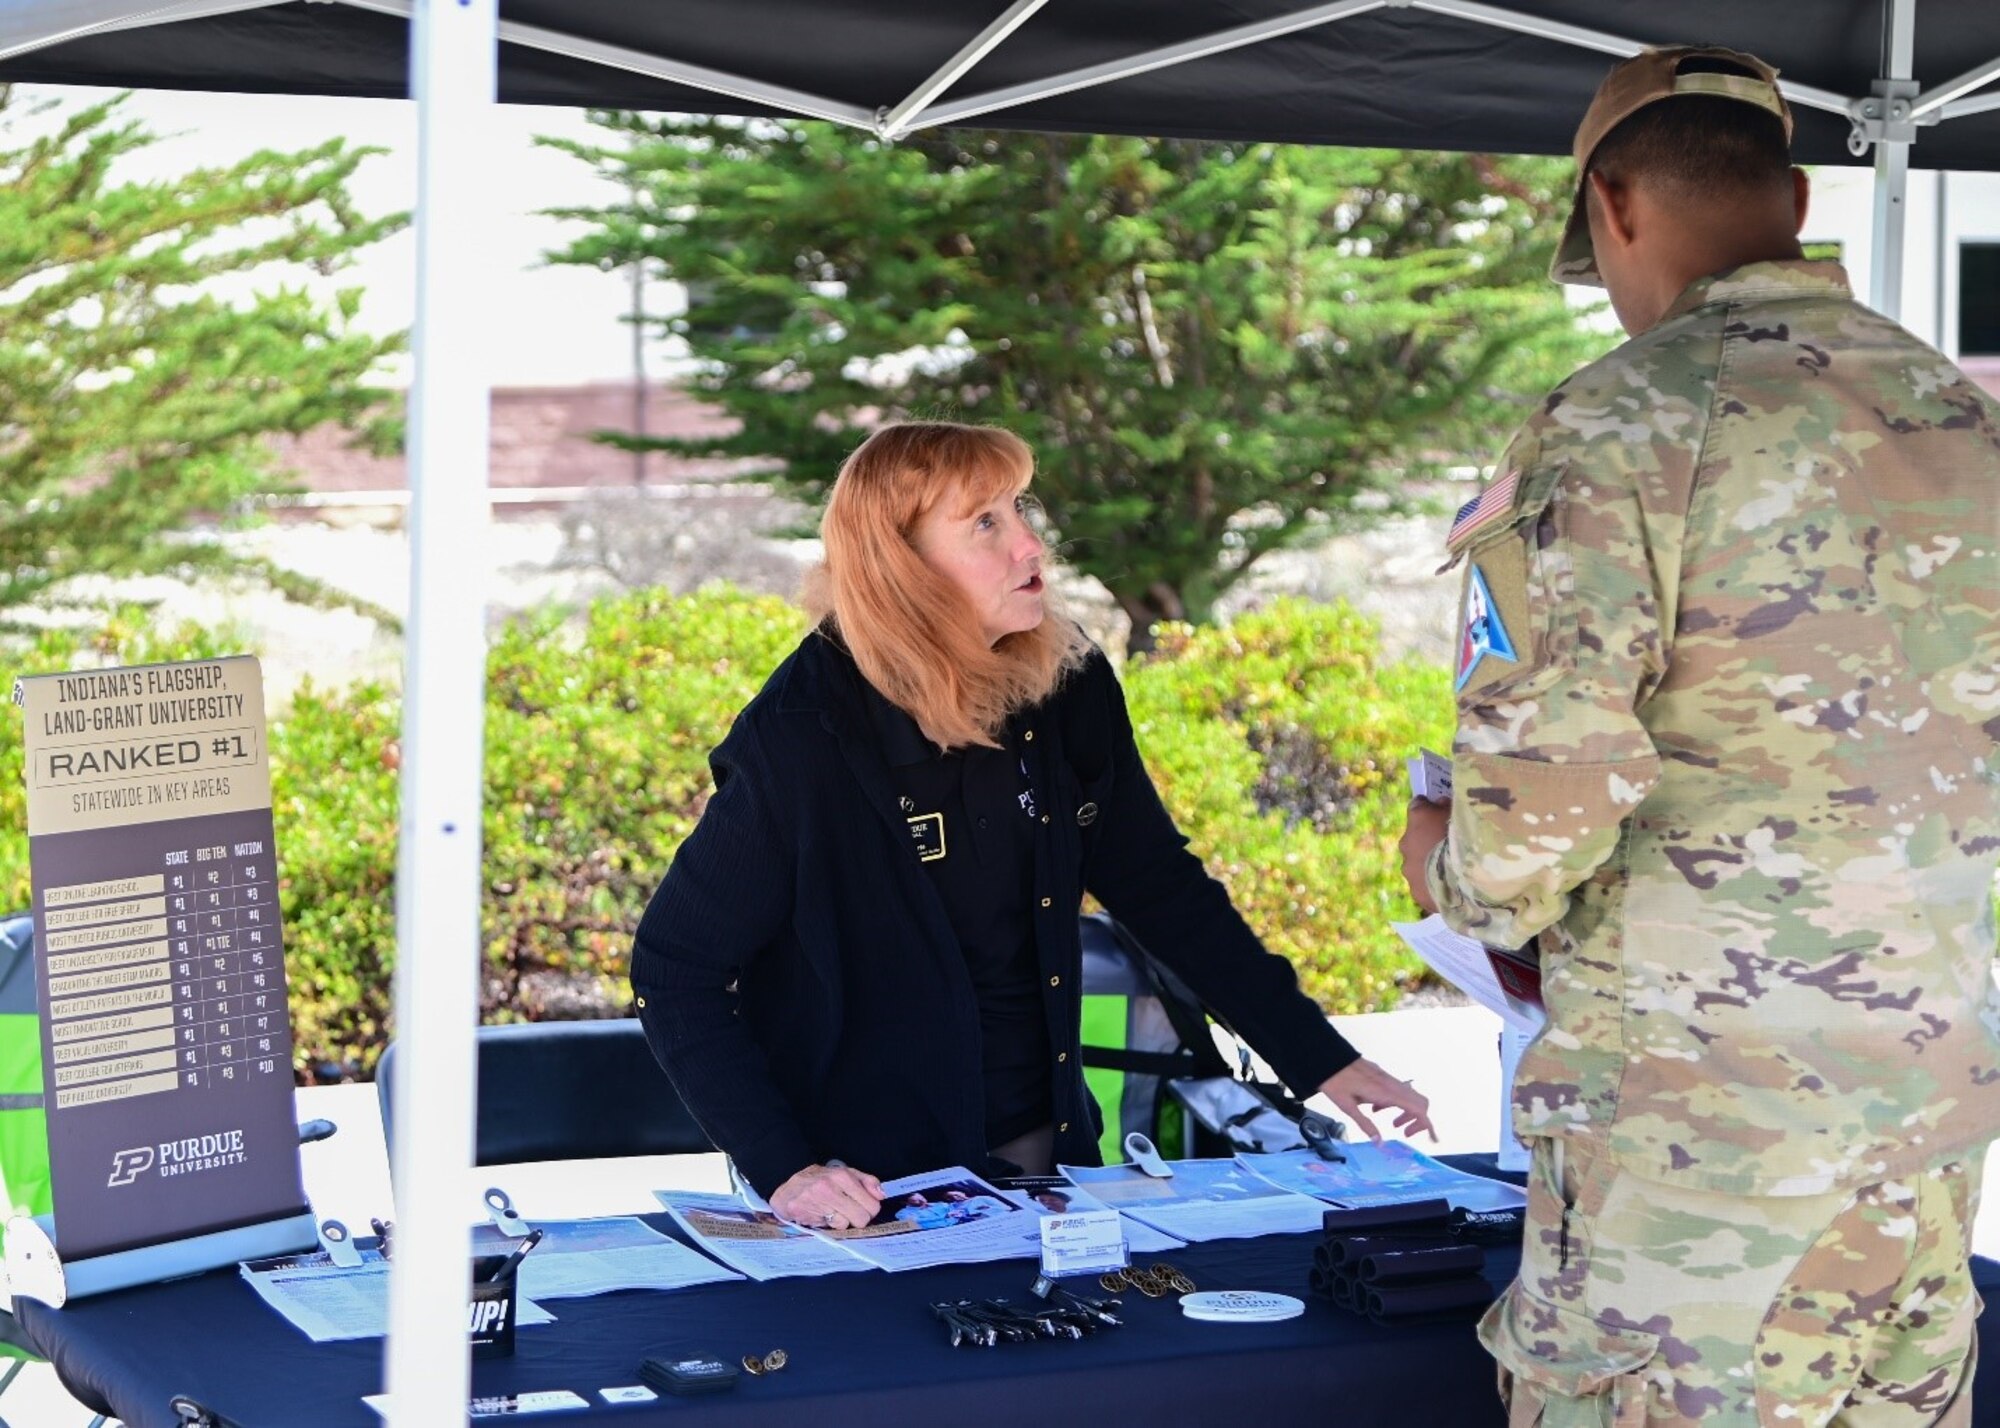 A representative from a university speaks to a person a military uniform.